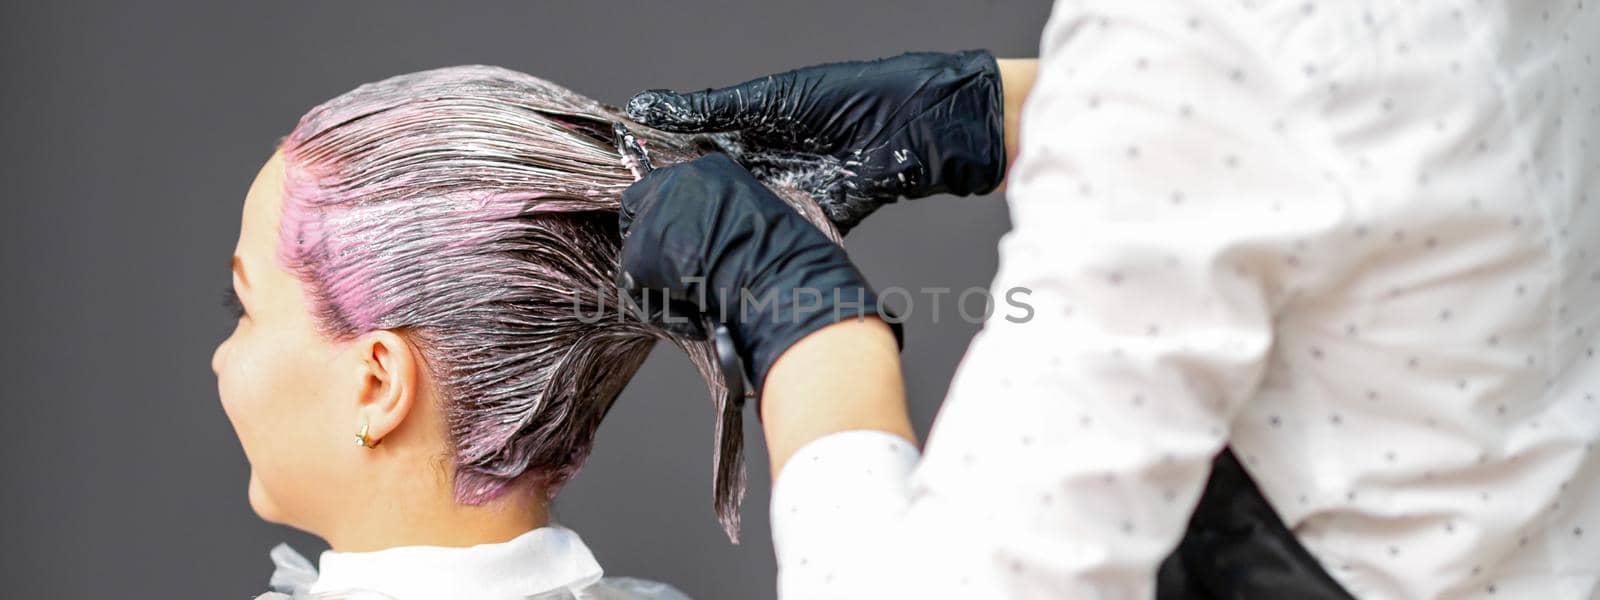 A hairdresser is applying color to the hair of a customer. Hair coloring in a beauty salon. Beauty and people concept. Close-up back view. by okskukuruza